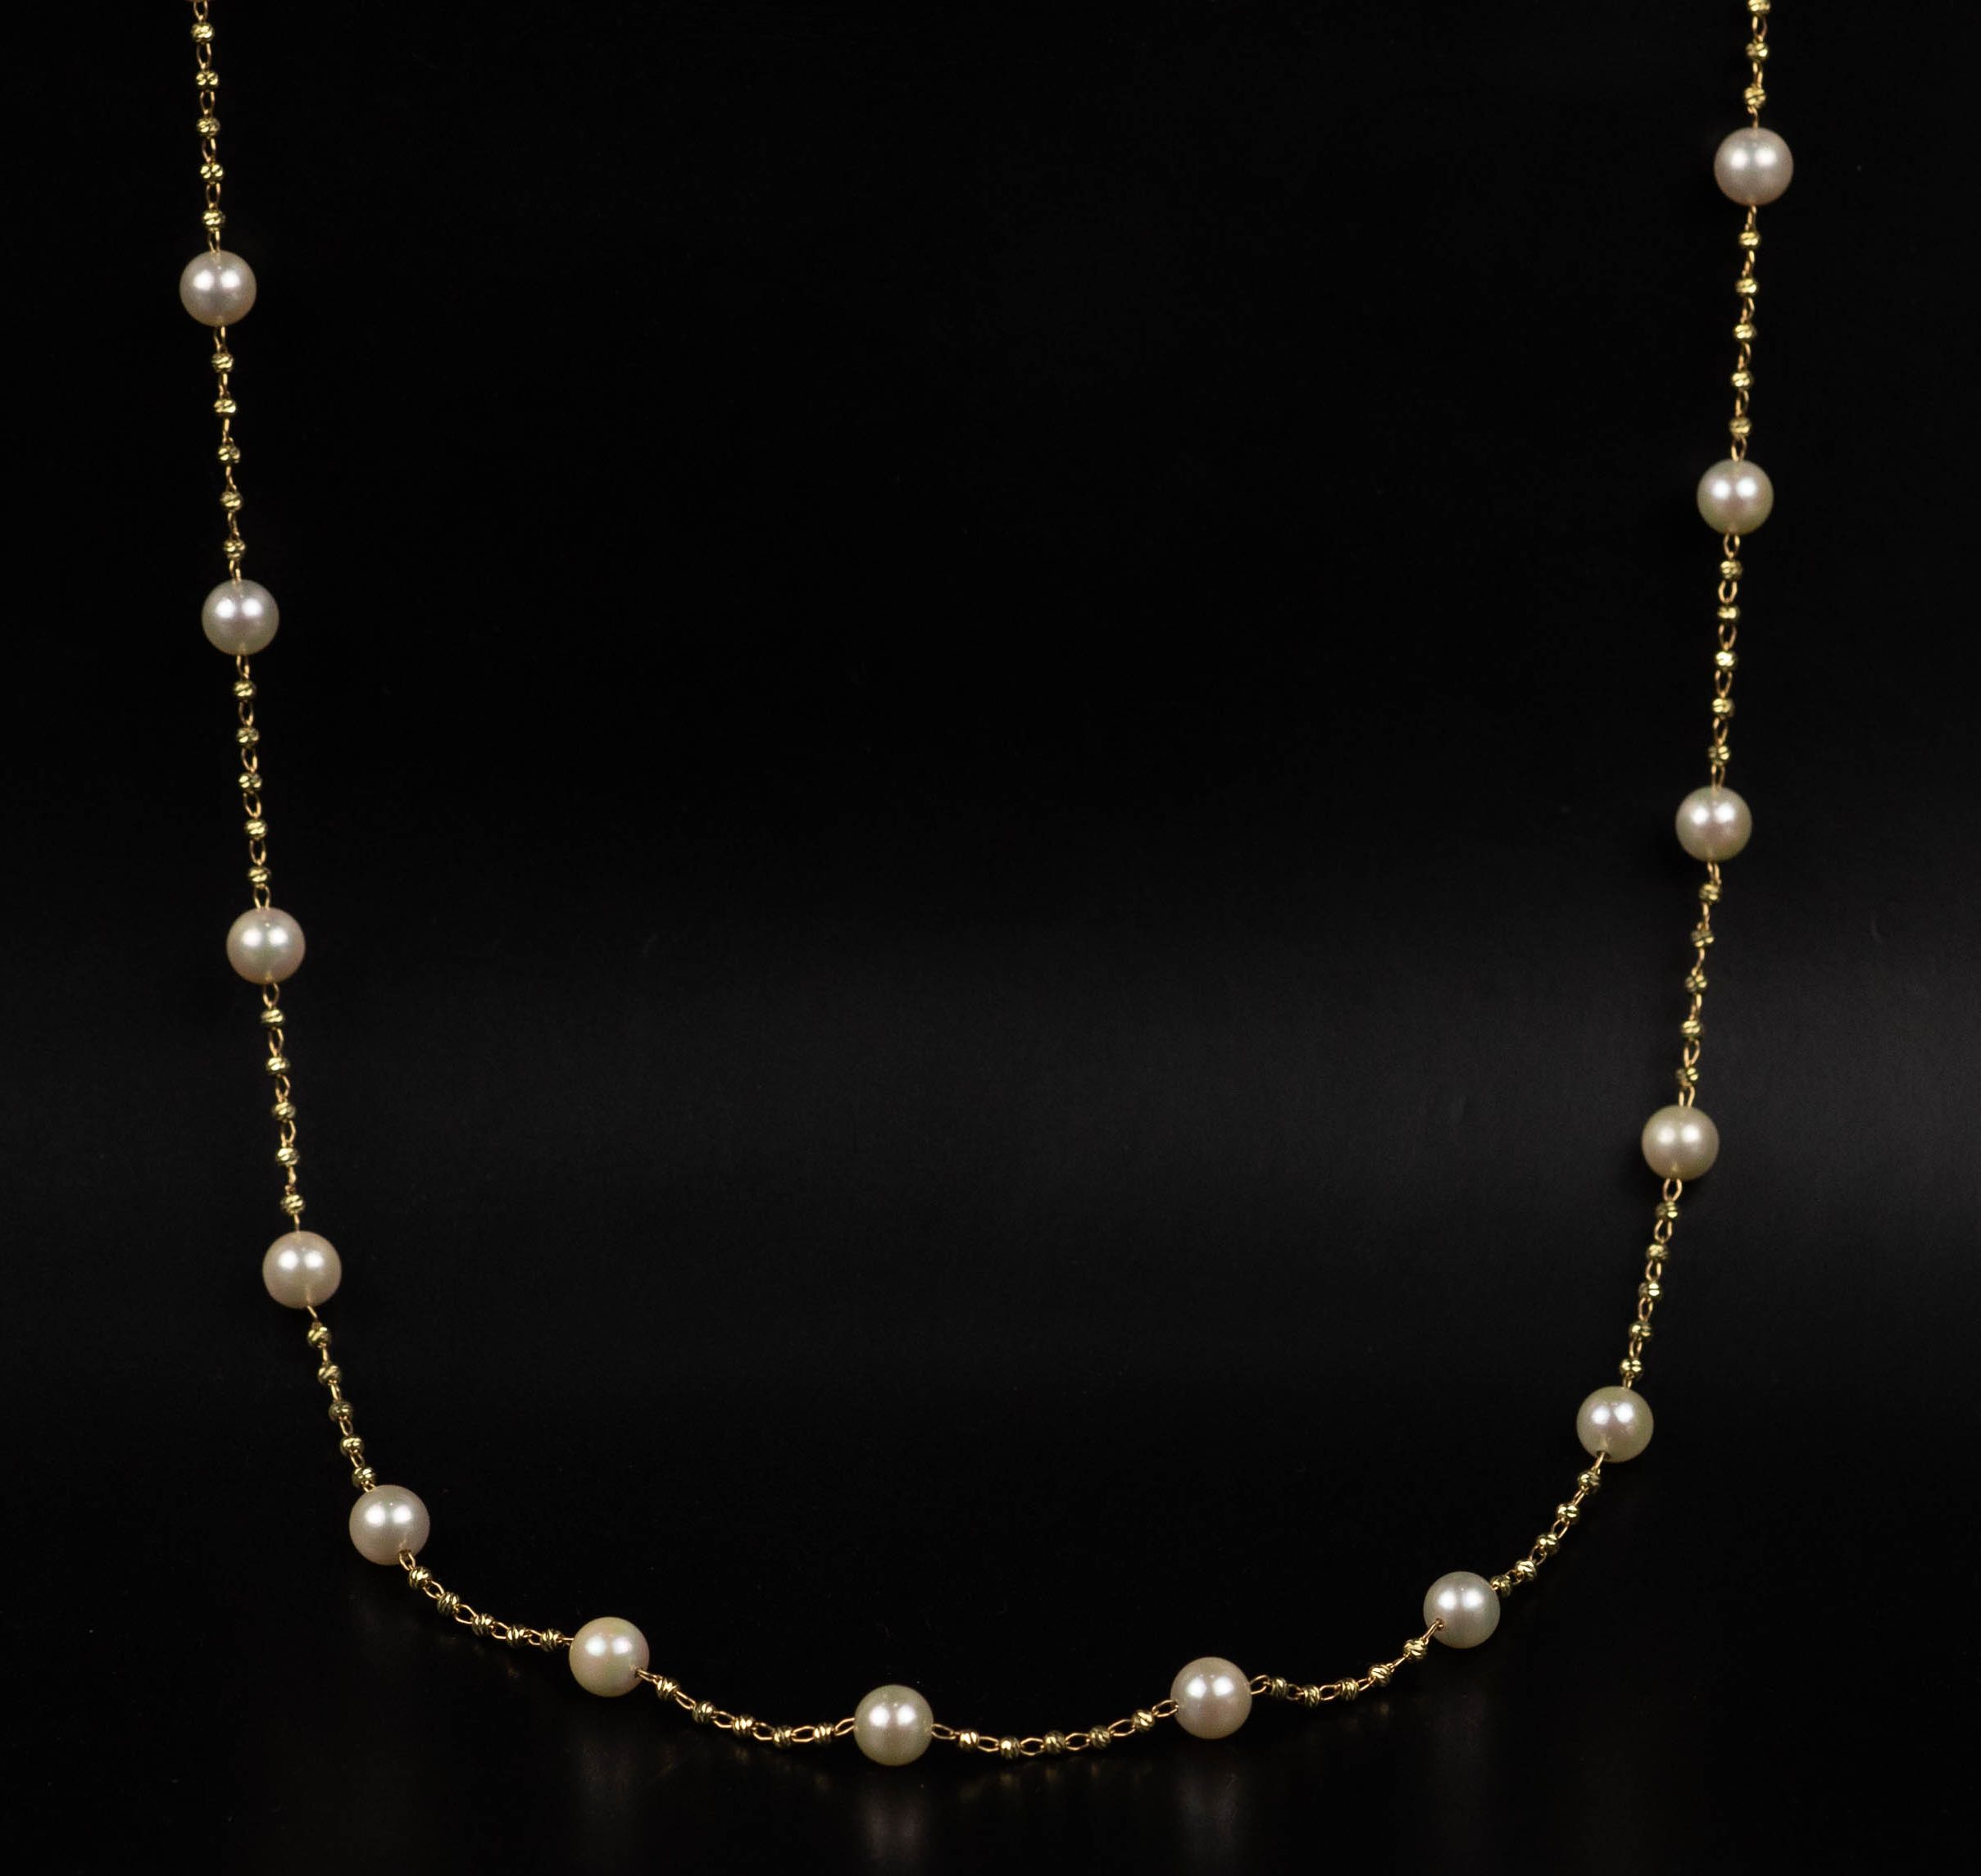 6mm-6.4mm Akoya Pearl Necklace 18k Yellow Gold N193